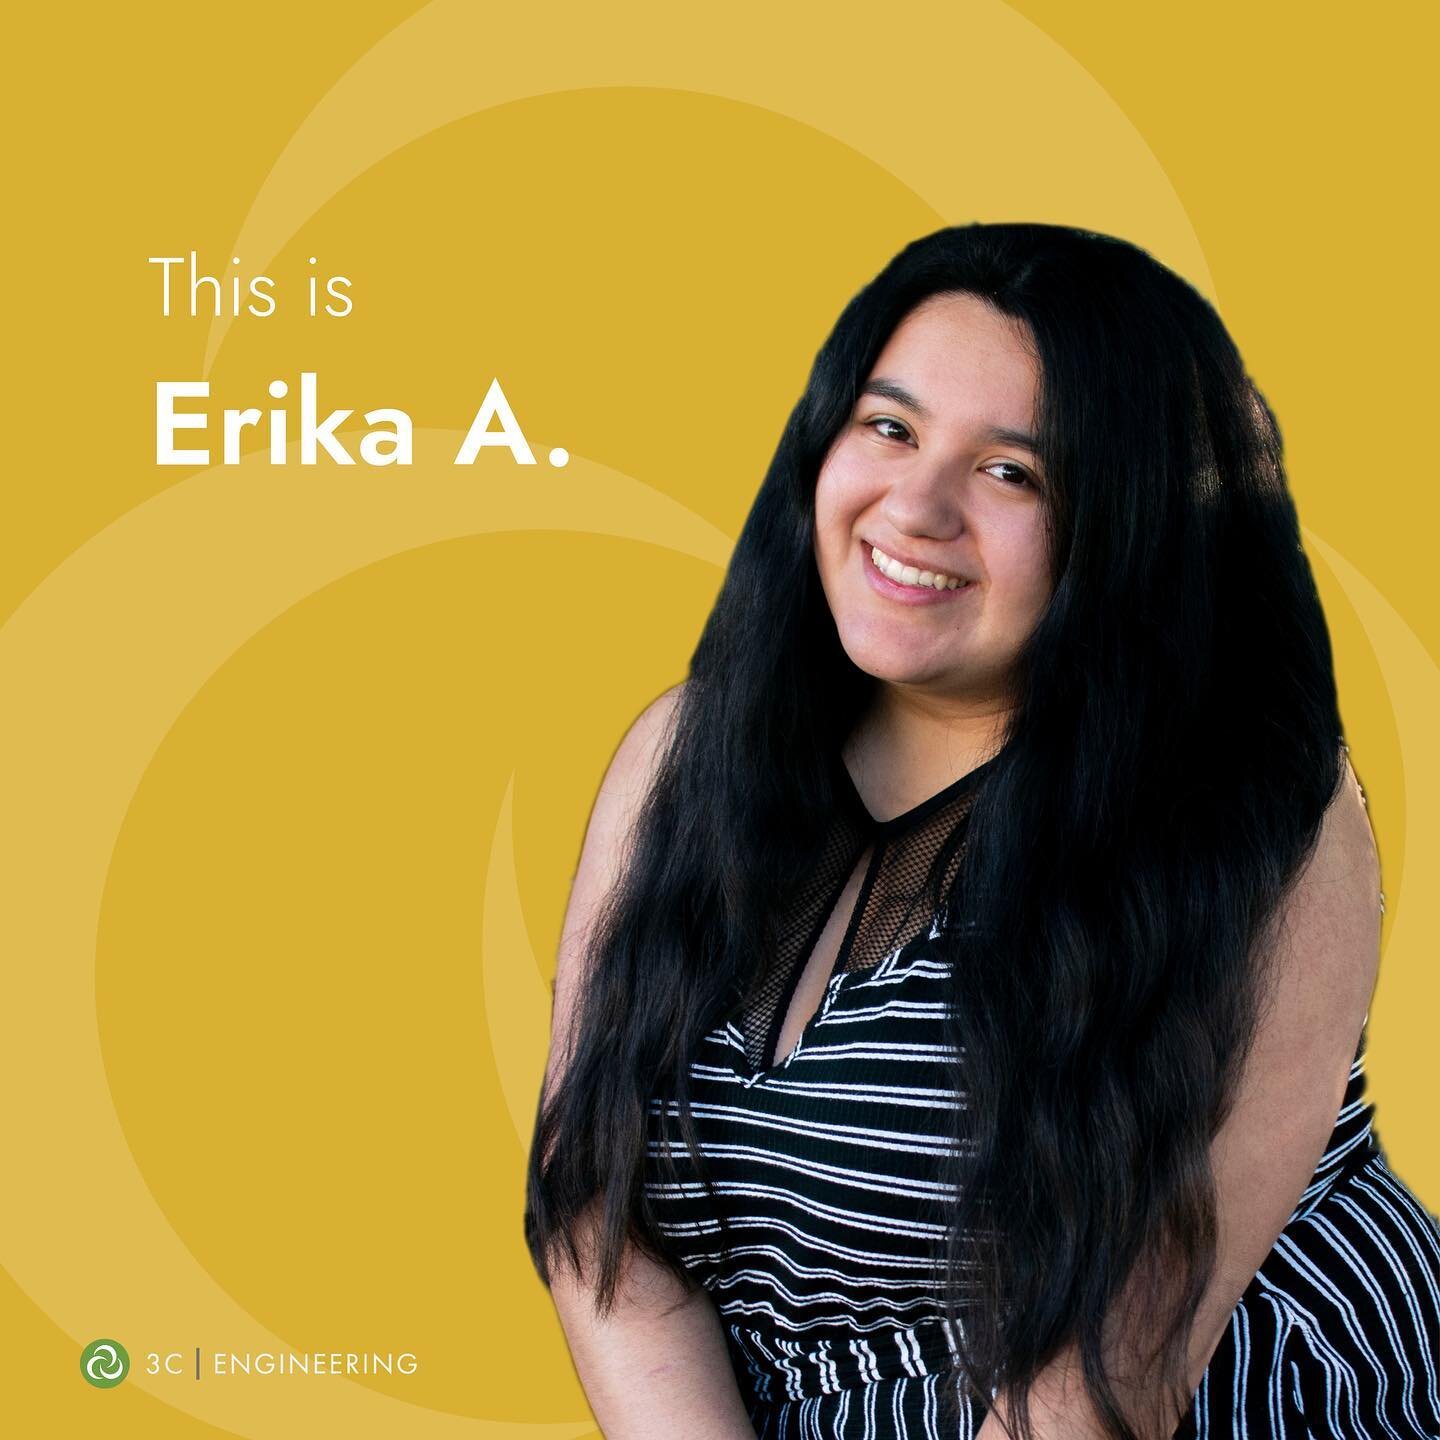 Meet the Team featuring: Erika A 🌻

Erika A has been part of the 3CE team since July 2020. Before joining, Erika was freelancing for 3CE, working on the design and development of Statement of Qualification documents. Now, she works as the Creative D